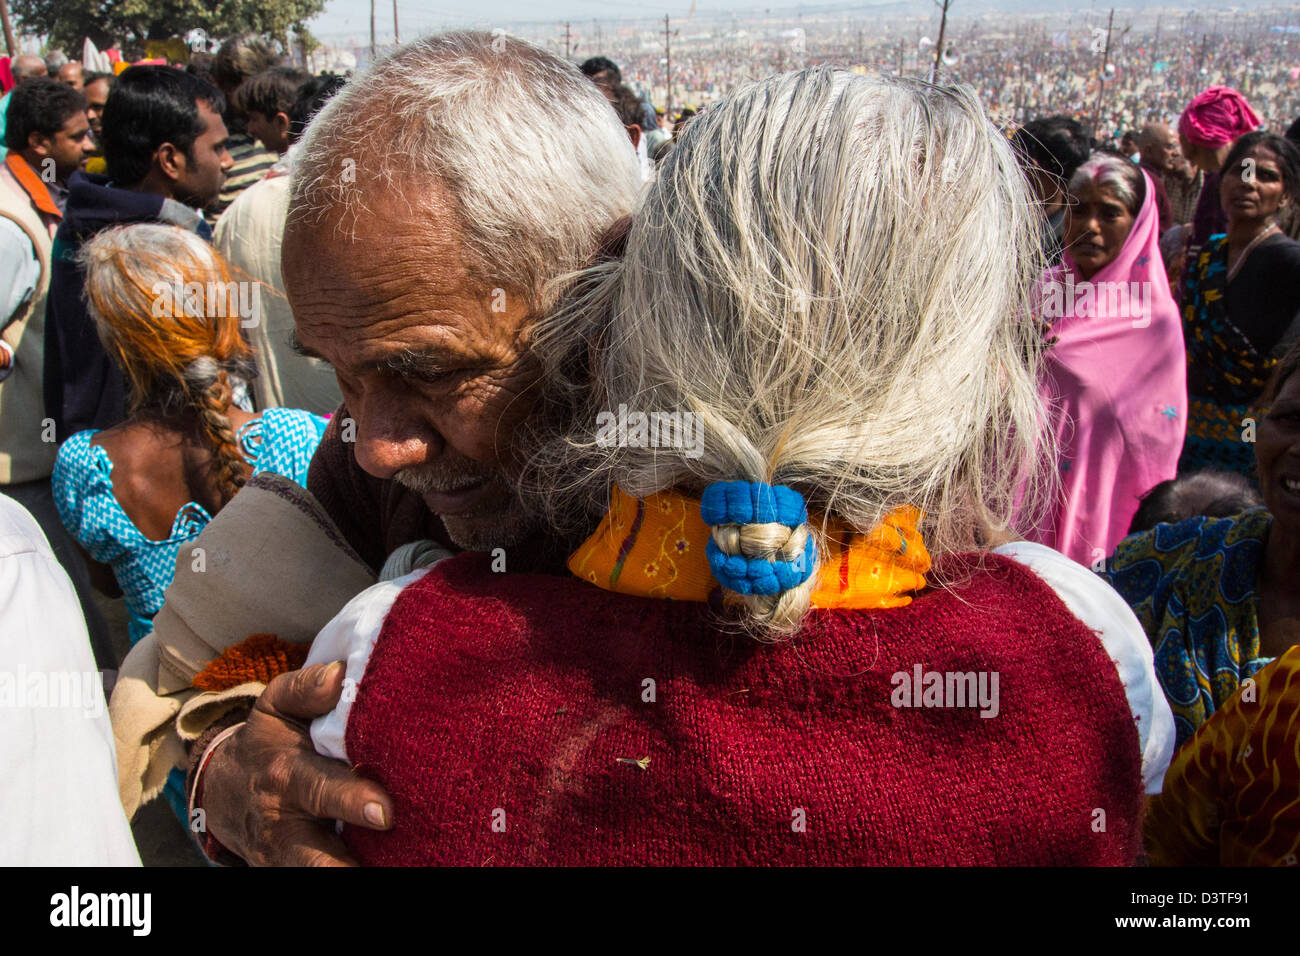 An elderly couple is reunited at the Lost and Found after being separated for several hours at the Kumbh Mela, Allahabad, India Stock Photo